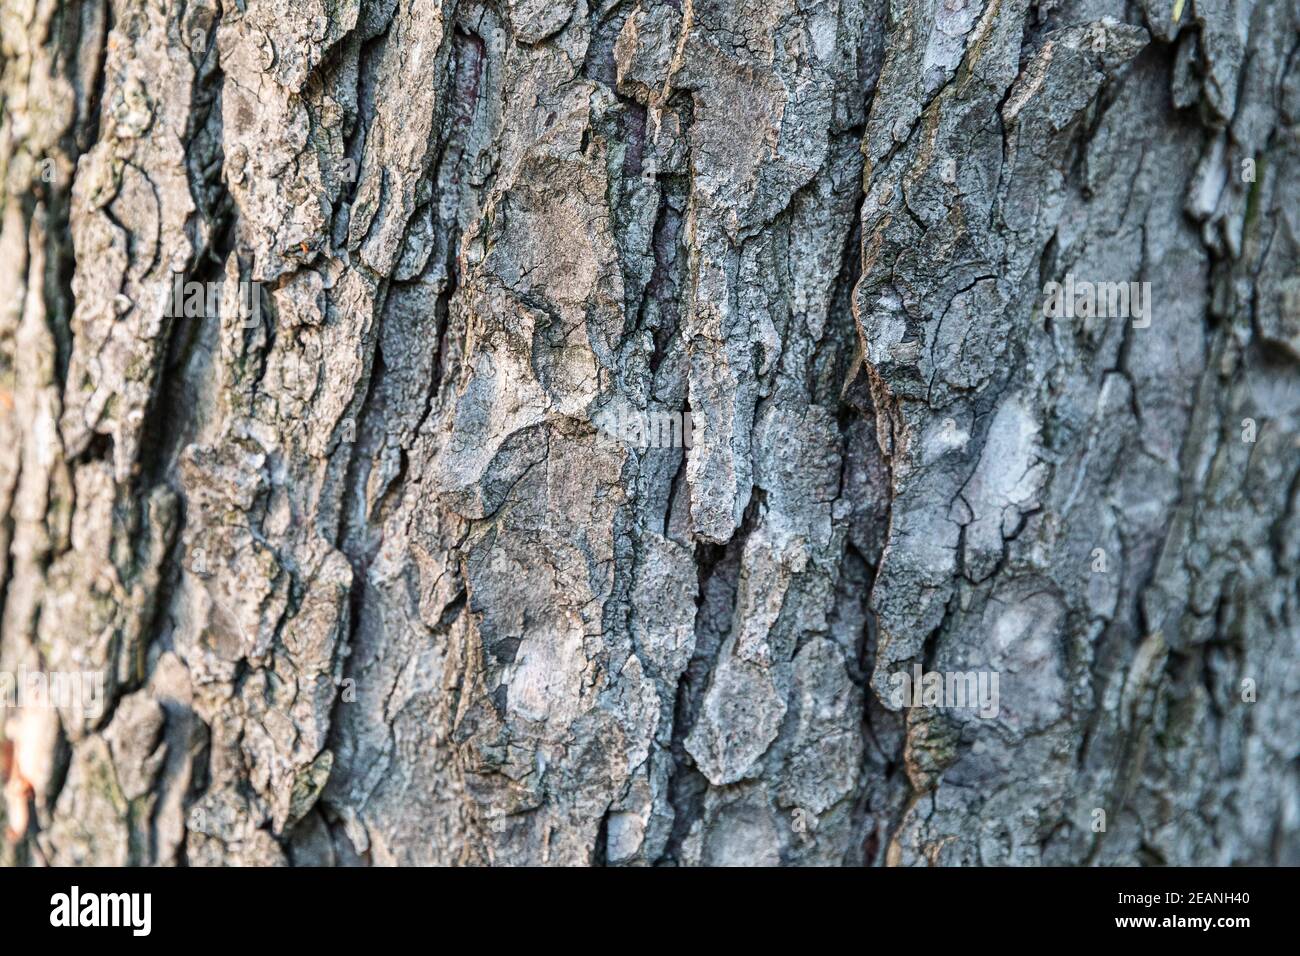 Old Wood Tree bark, texture natural background close-up Stock Photo